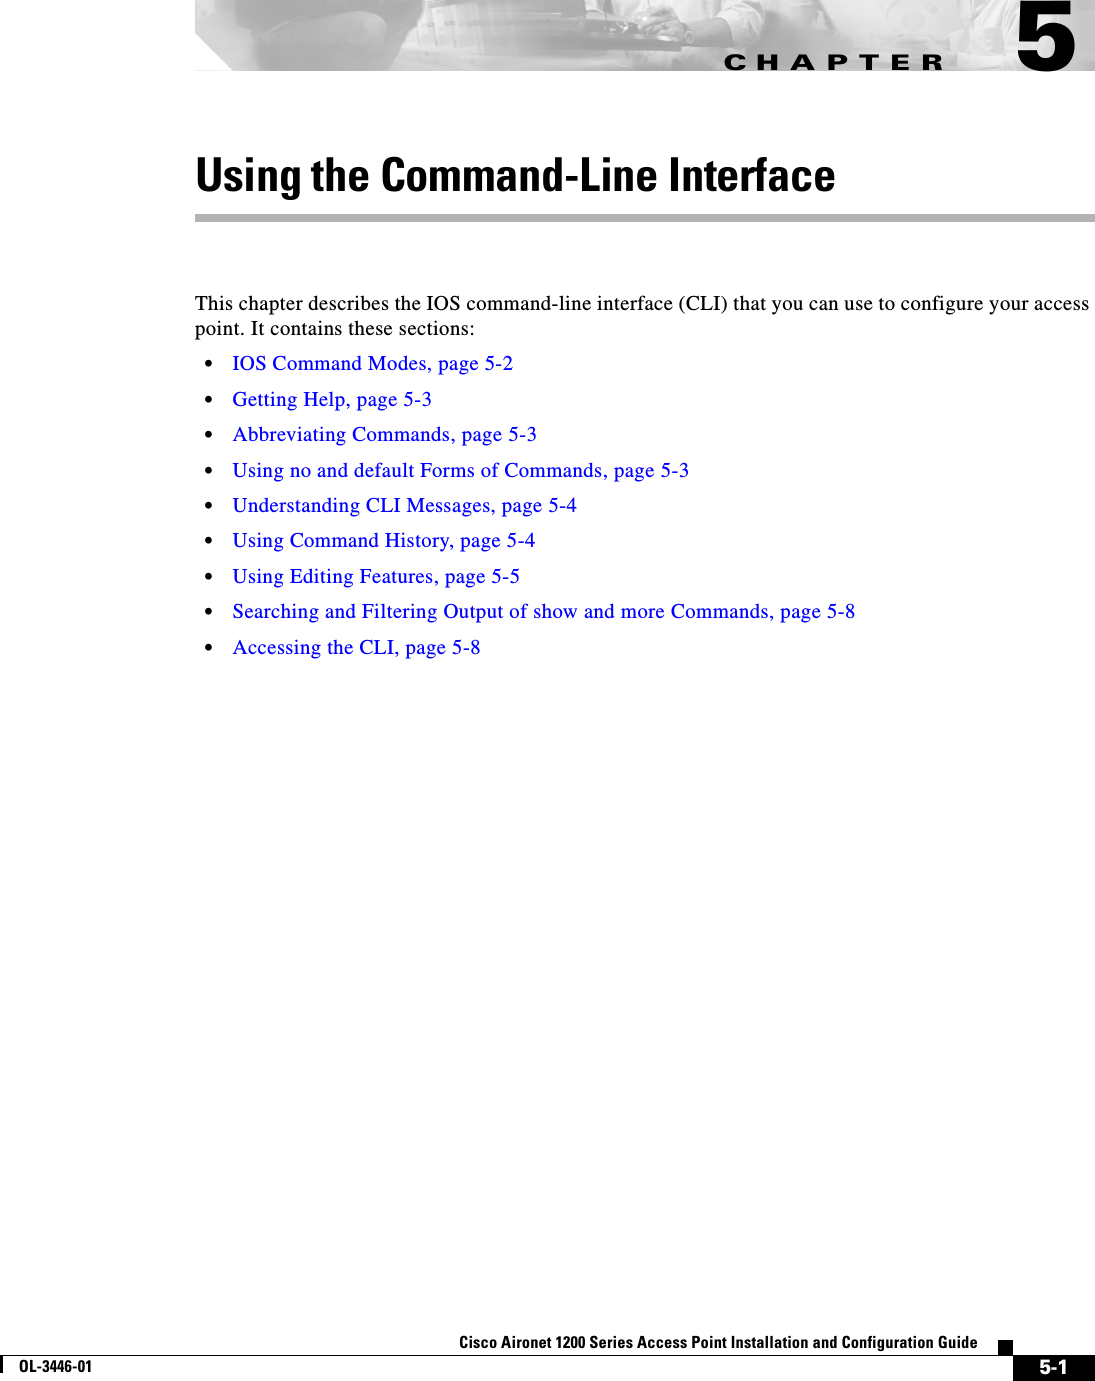 CHAPTER5-1Cisco Aironet 1200 Series Access Point Installation and Configuration GuideOL-3446-015Using the Command-Line InterfaceThis chapter describes the IOS command-line interface (CLI) that you can use to configure your access point. It contains these sections:•IOS Command Modes, page 5-2•Getting Help, page 5-3•Abbreviating Commands, page 5-3•Using no and default Forms of Commands, page 5-3•Understanding CLI Messages, page 5-4•Using Command History, page 5-4•Using Editing Features, page 5-5•Searching and Filtering Output of show and more Commands, page 5-8•Accessing the CLI, page 5-8